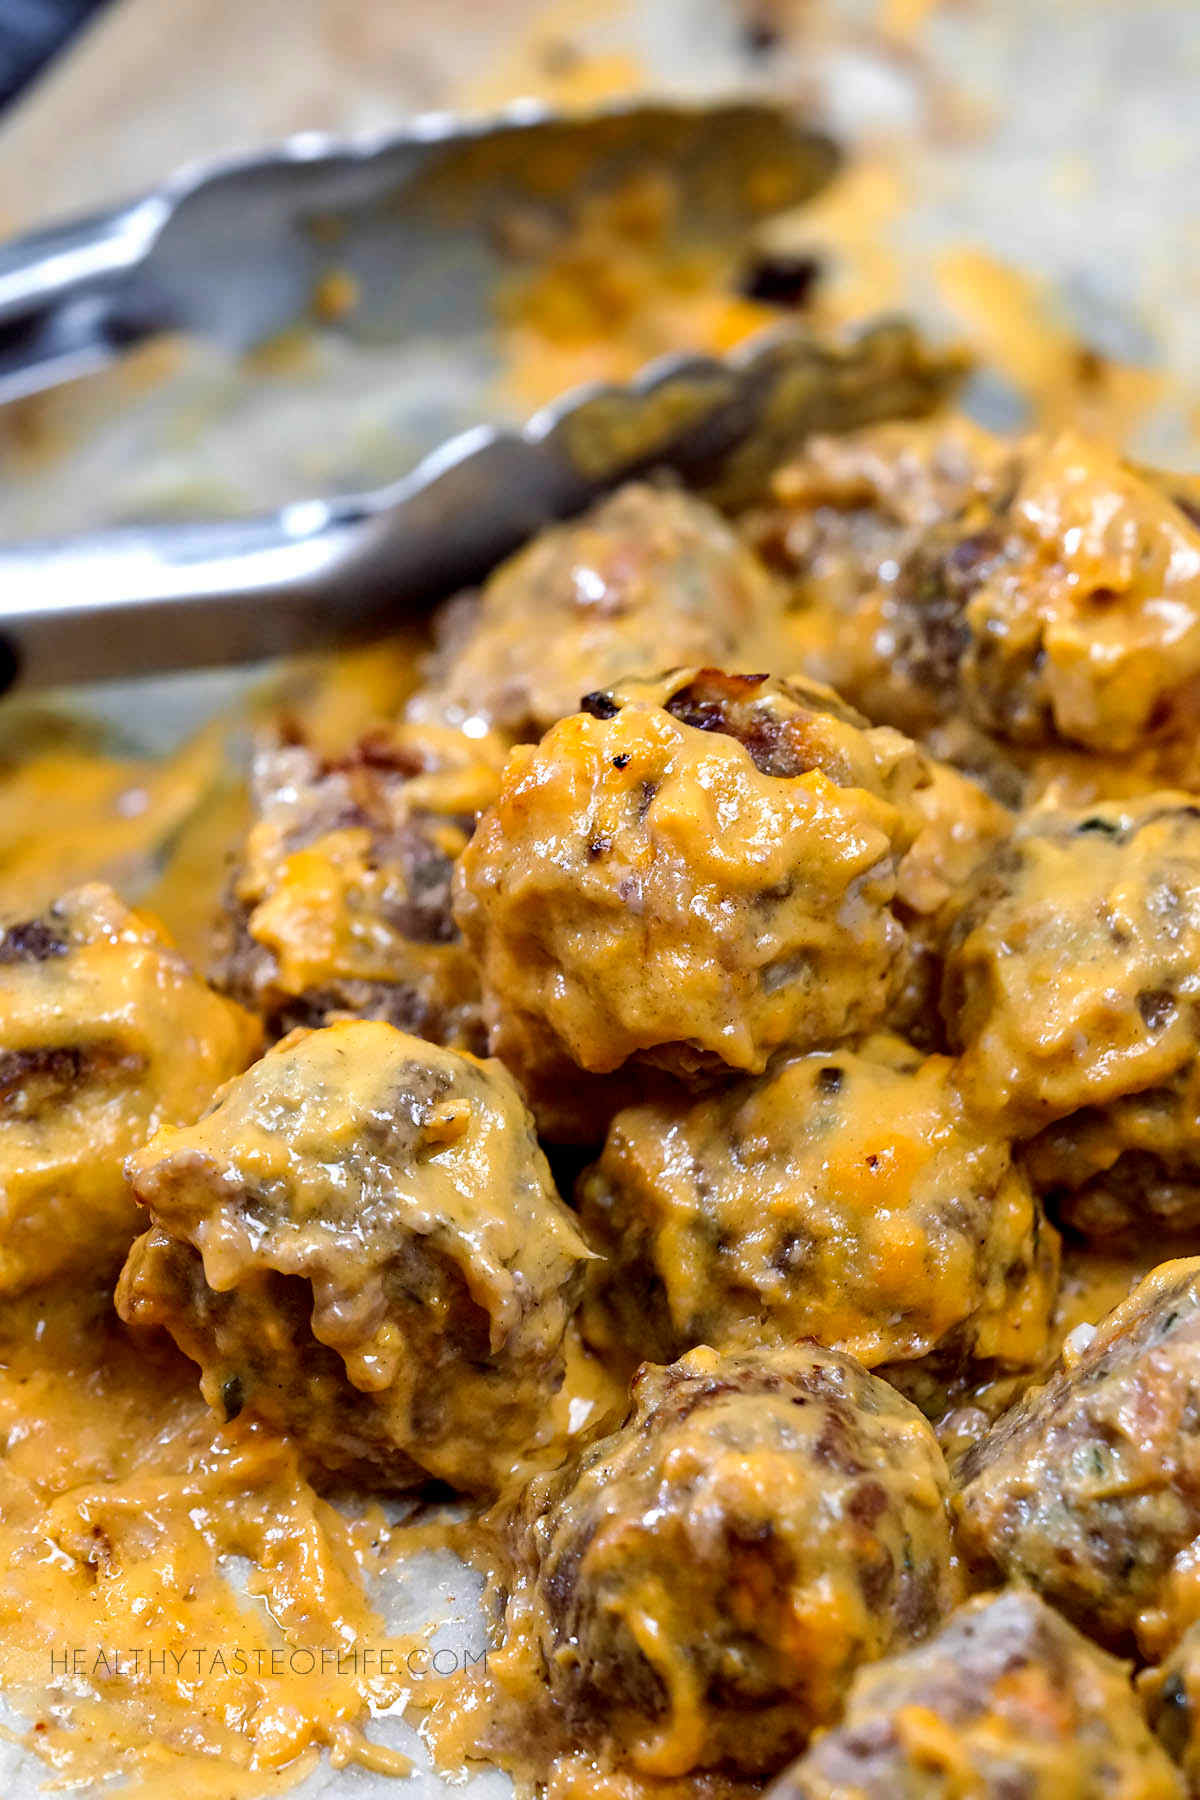 Mixing the beef meatballs with it's juices leaked after baking with the mango sauce makes a delicious creamy gravy.